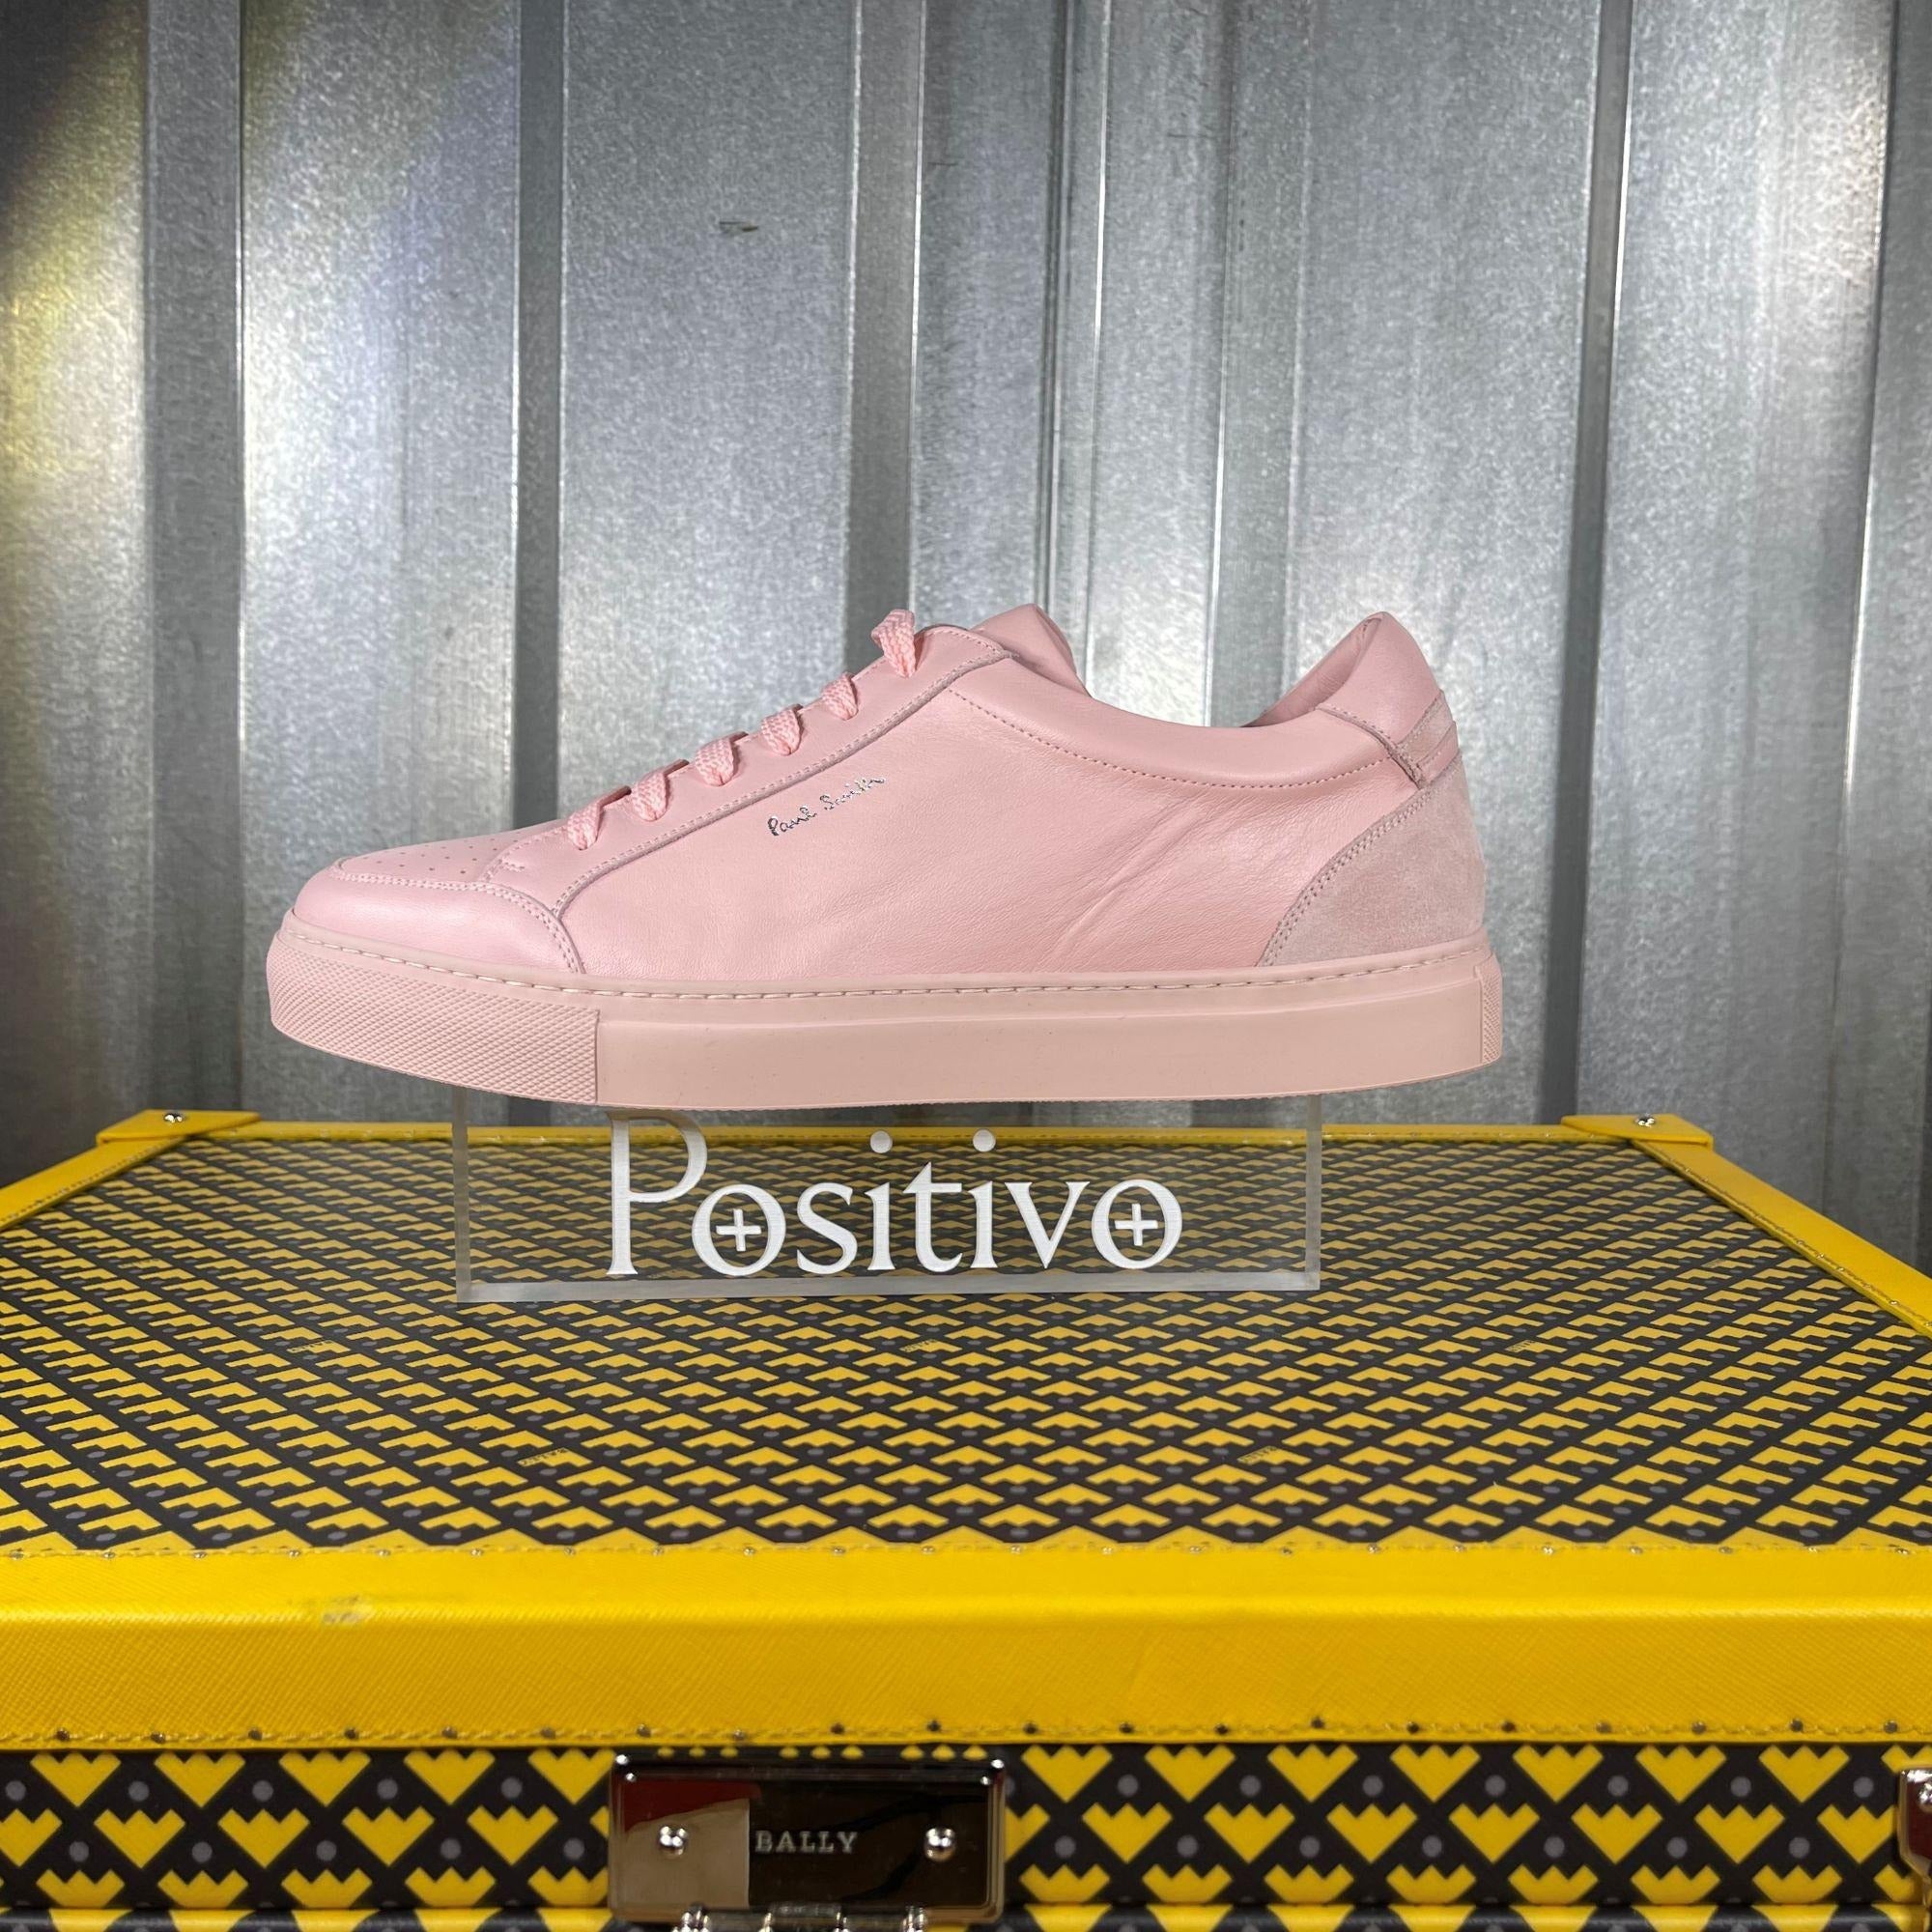 Paul Smith PRI10 Primo Powder Pink Leather Low Top Sneakers | Positivo Clothing